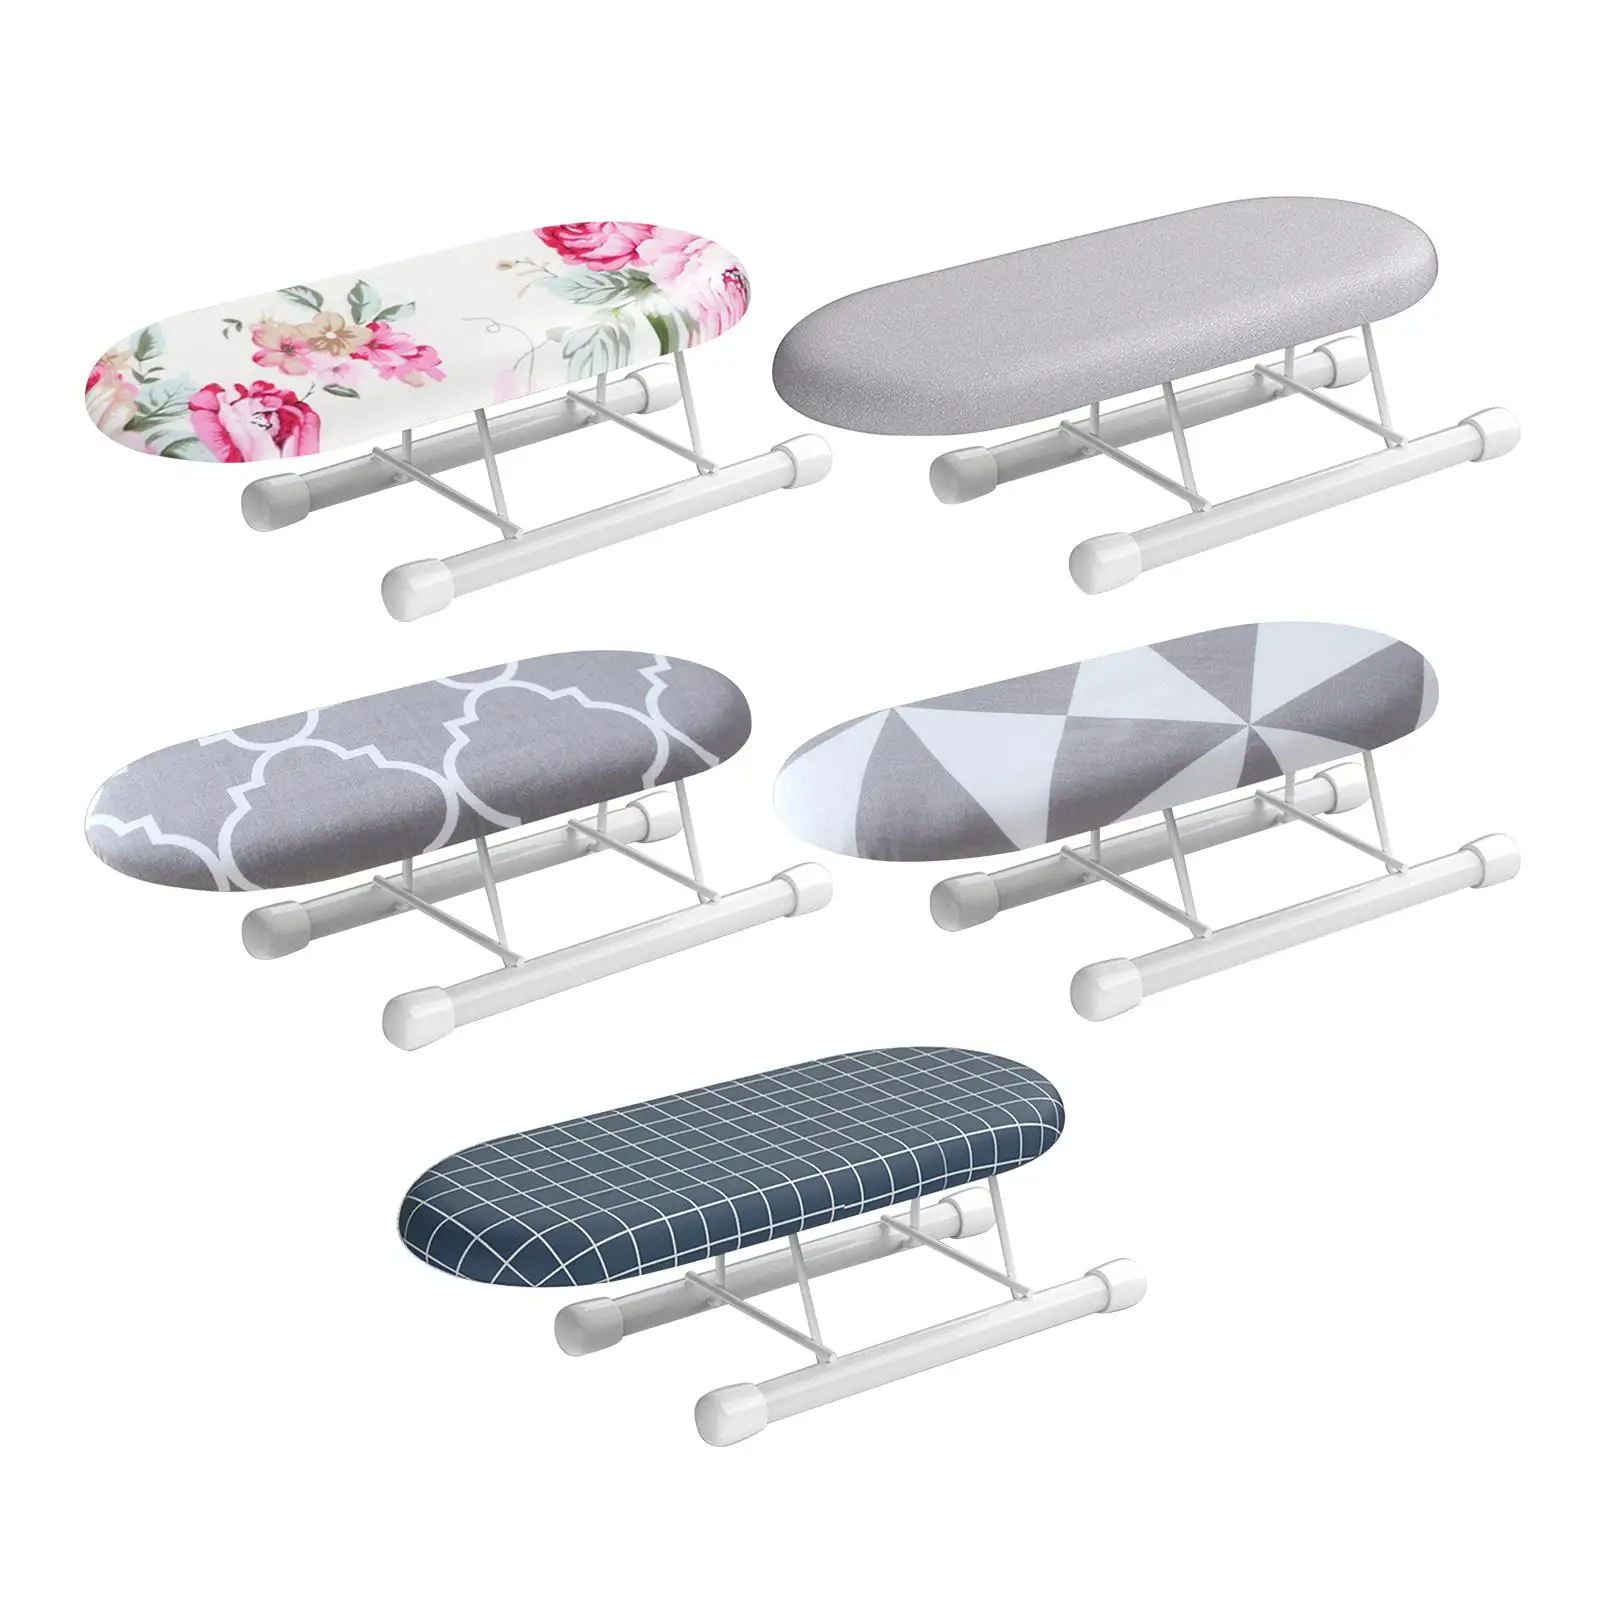 

Small Folding Ironing Board, Removable Cover, Ironing Cuffs Neckline for Apartments, Home, Travel